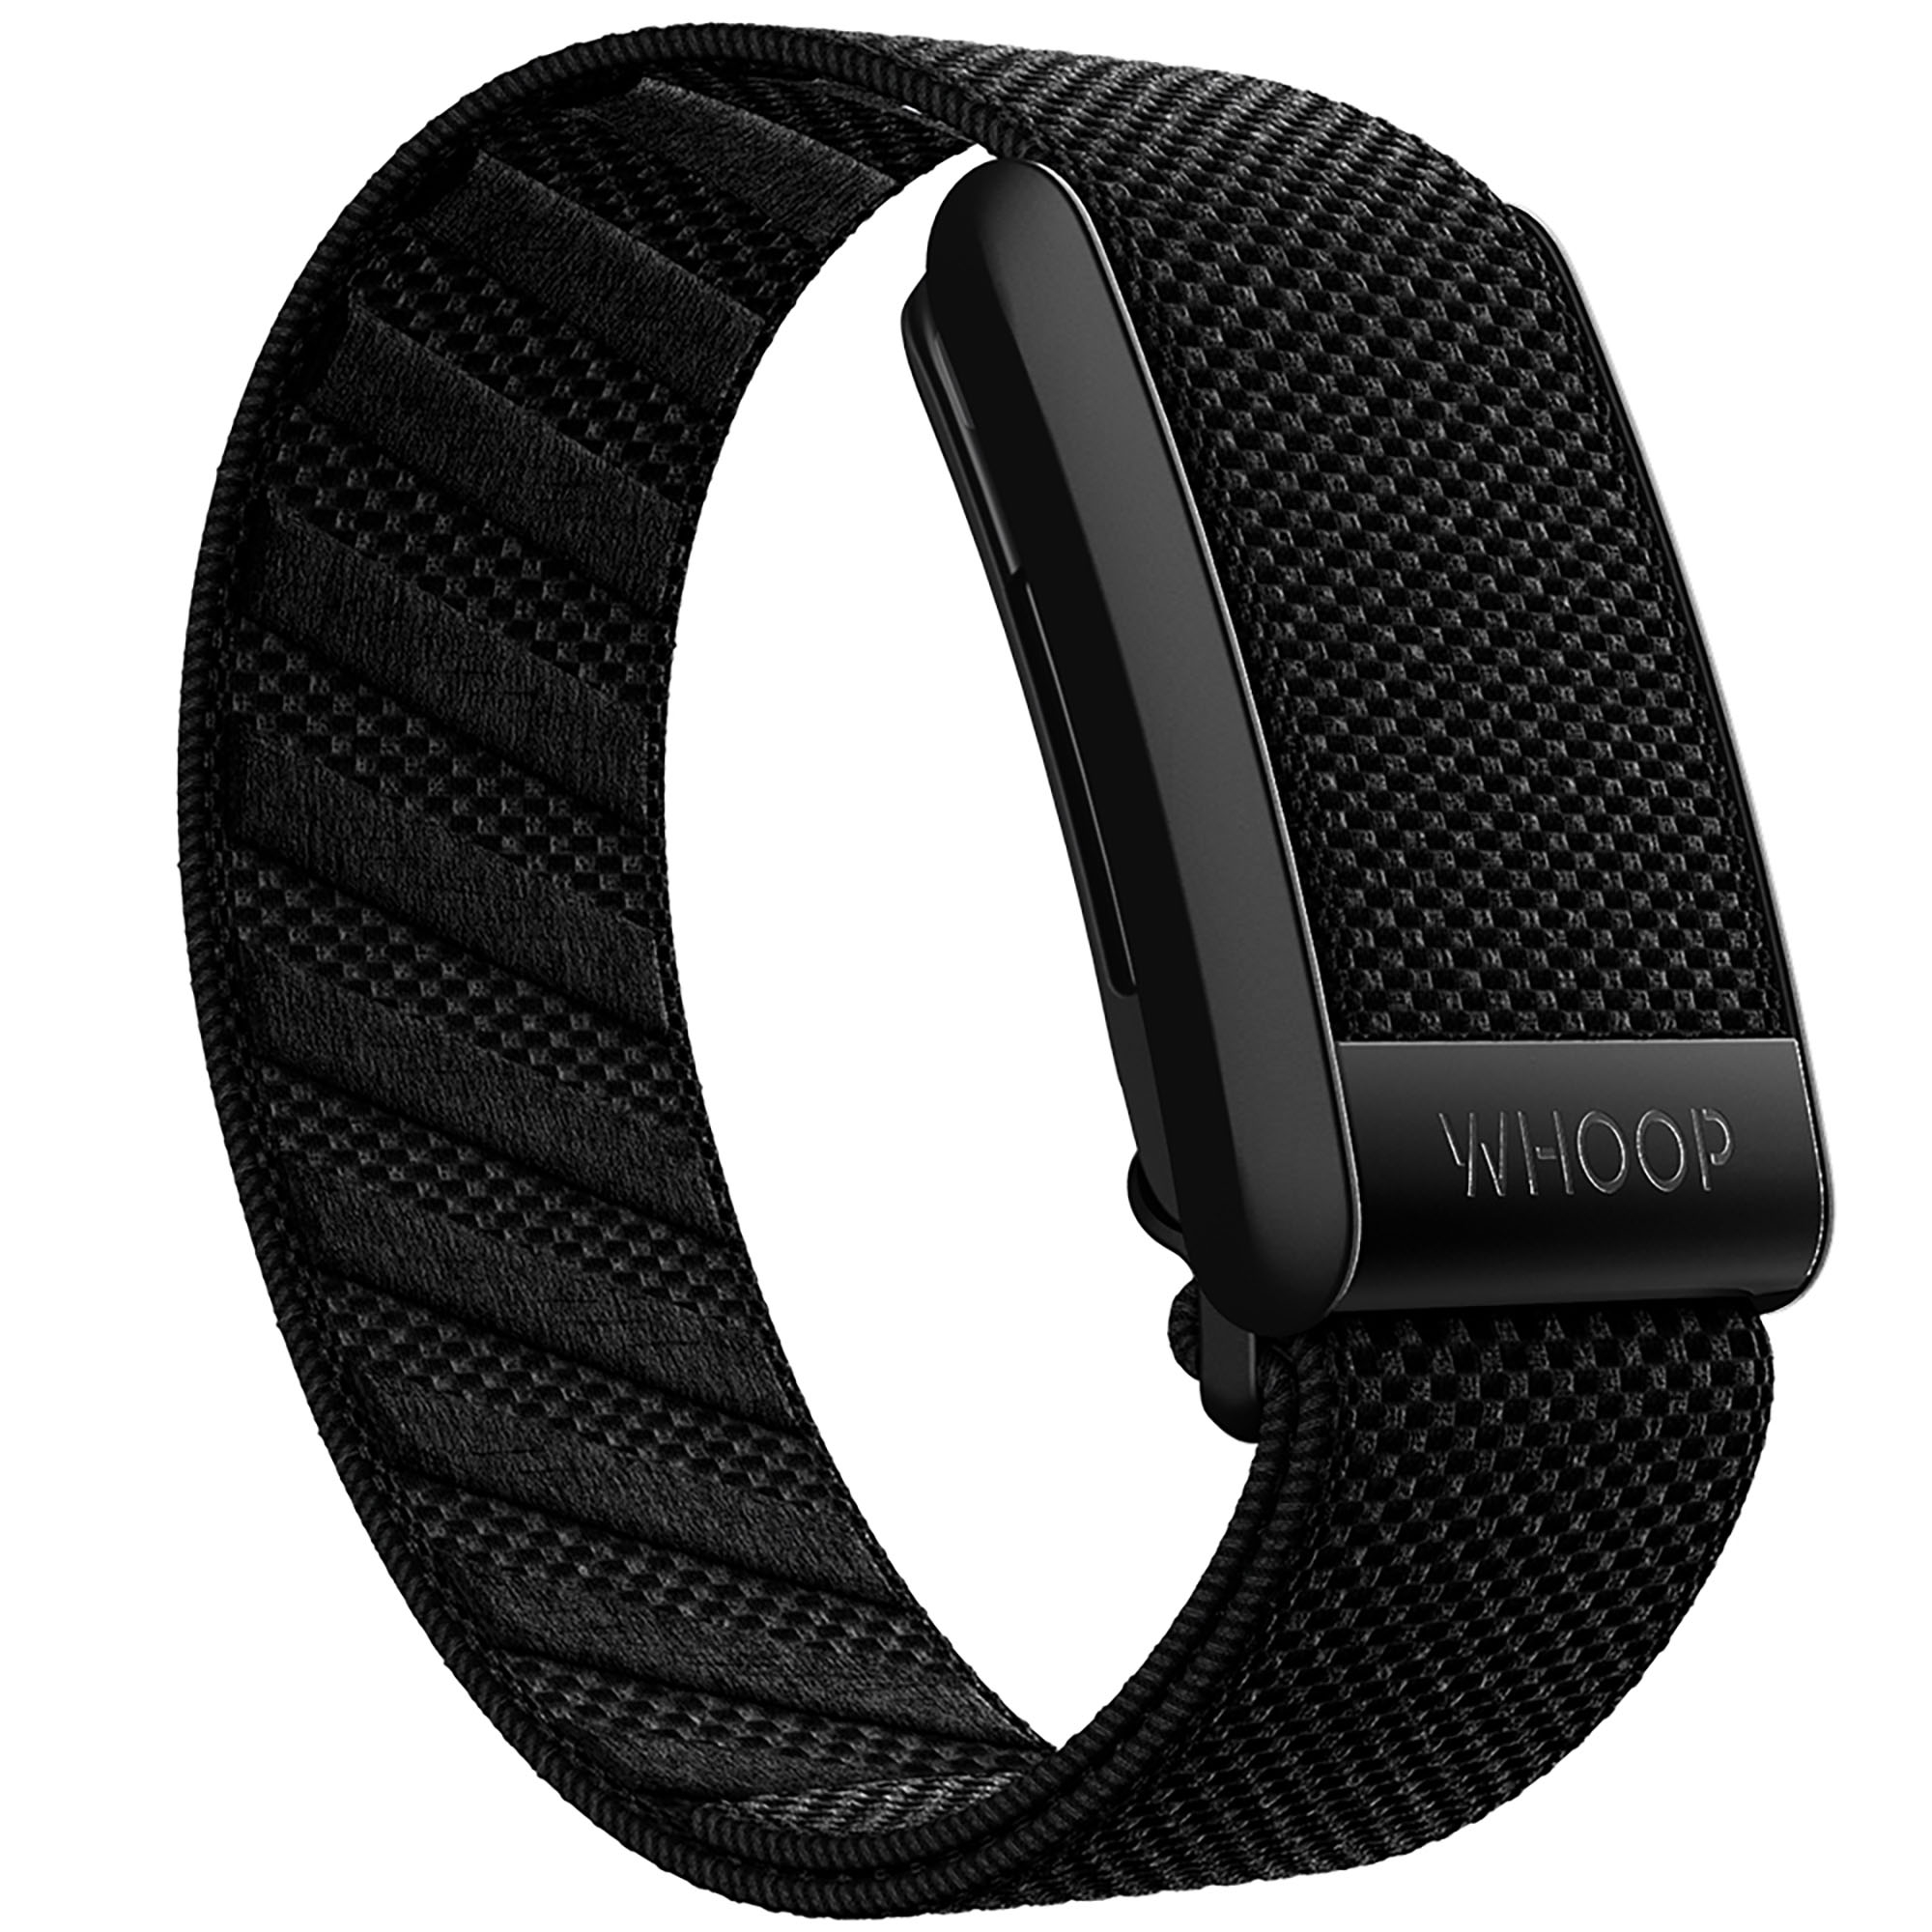 WHOOP 4.0 Health and Fitness Tracker with 12 Month Subscription